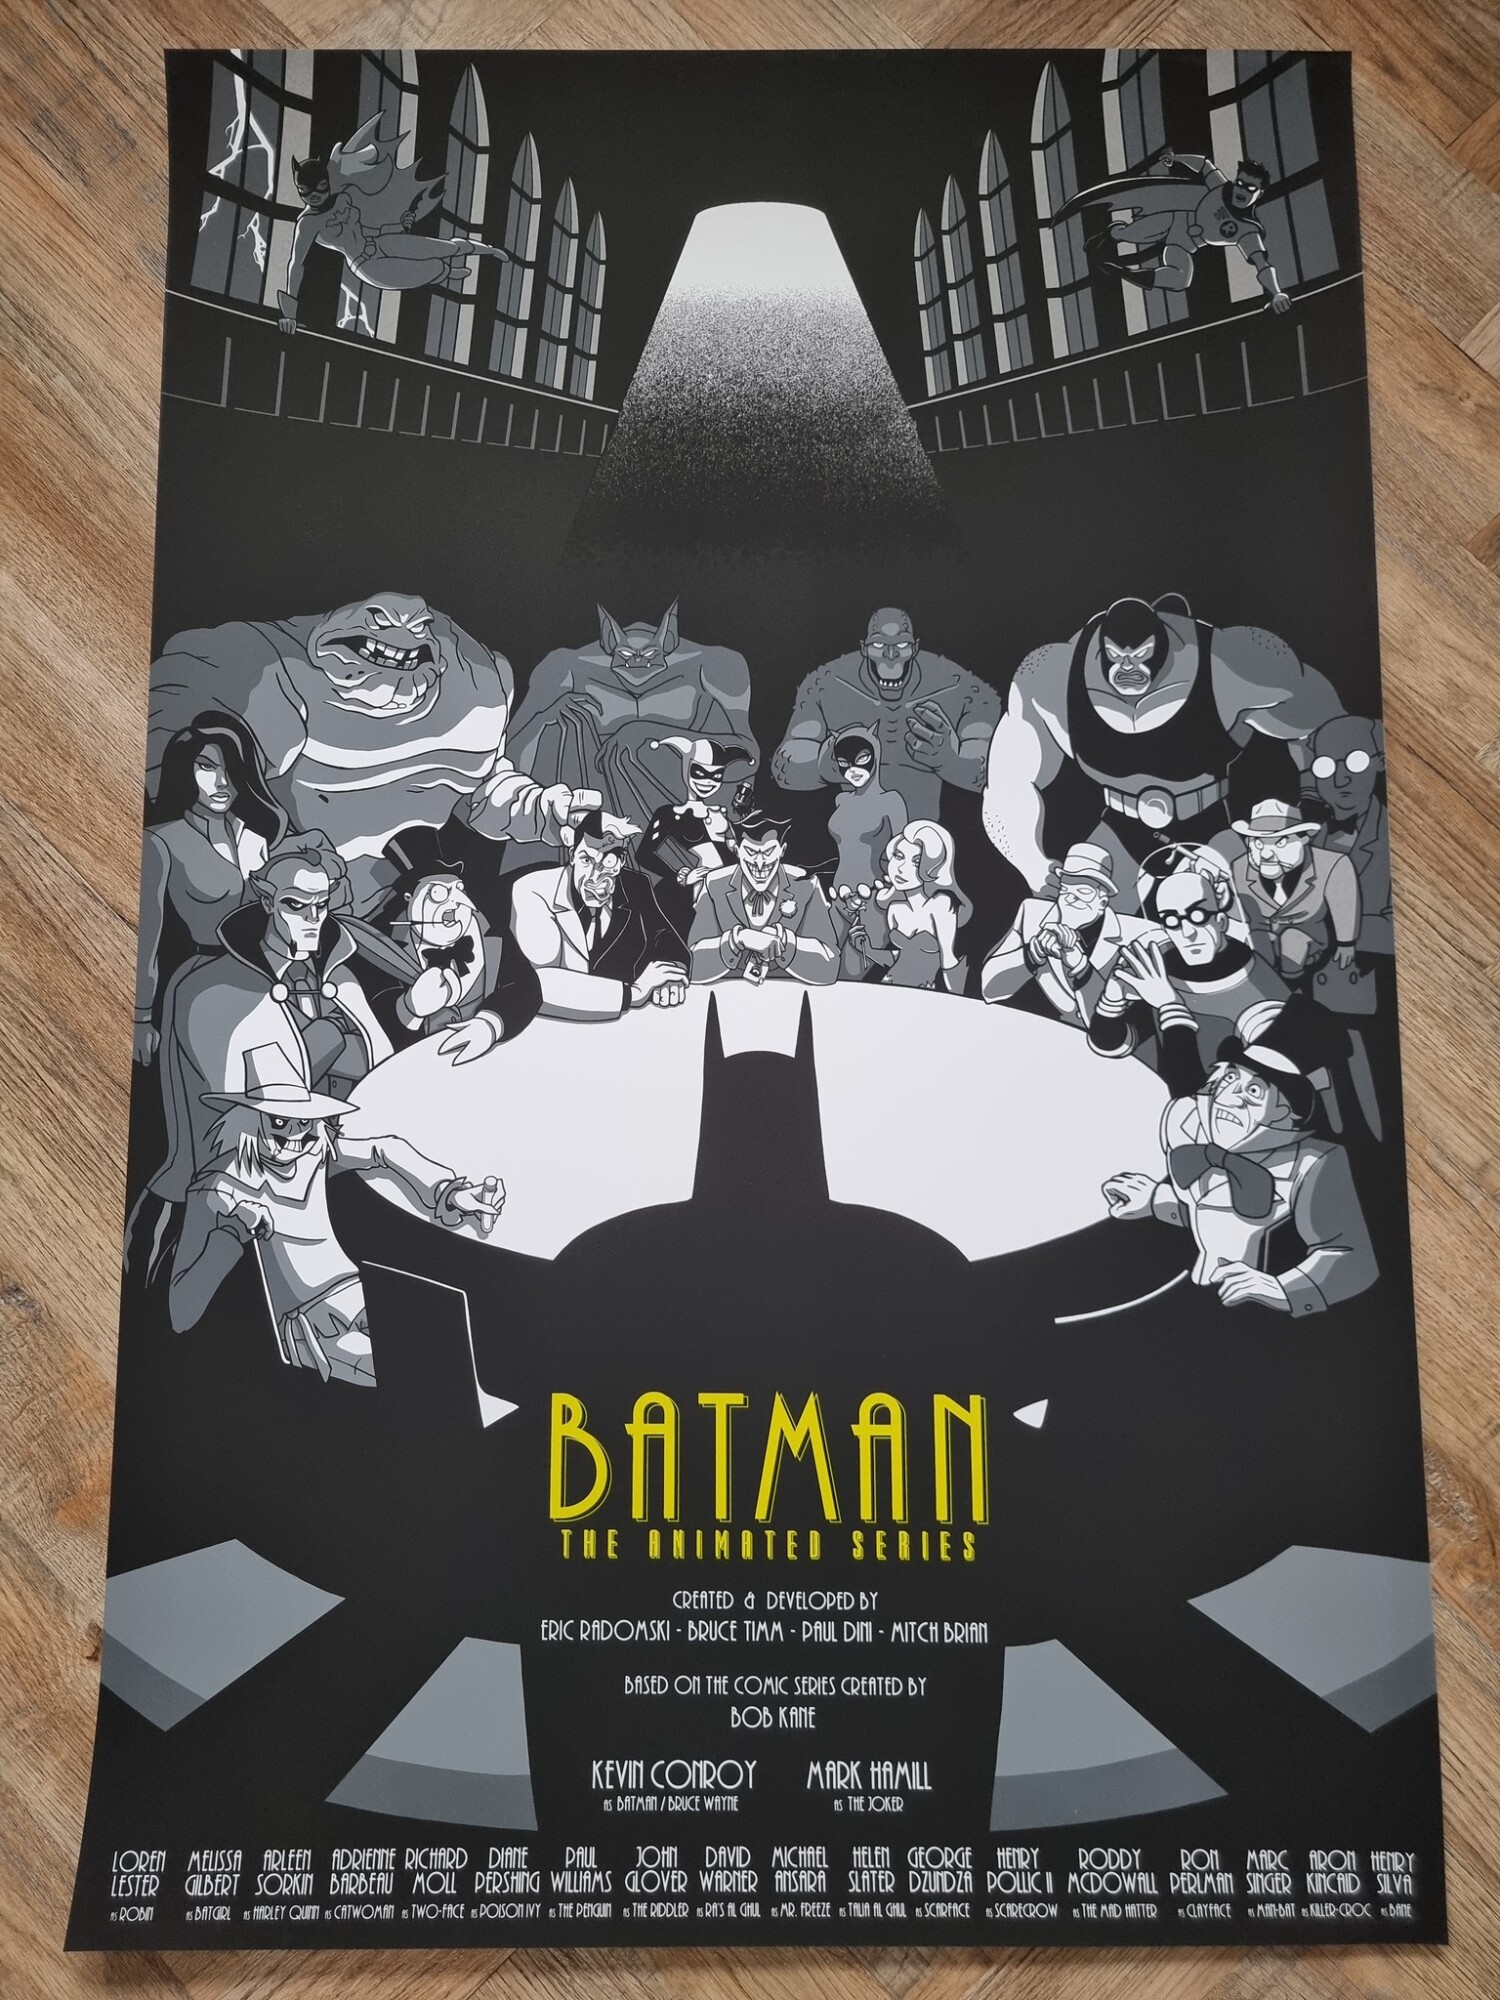 Batman: The Animated Series “The AA Meeting” 24×36 15 colour reg and 5 colour variant with GID and yellow gloas varnish screenprint